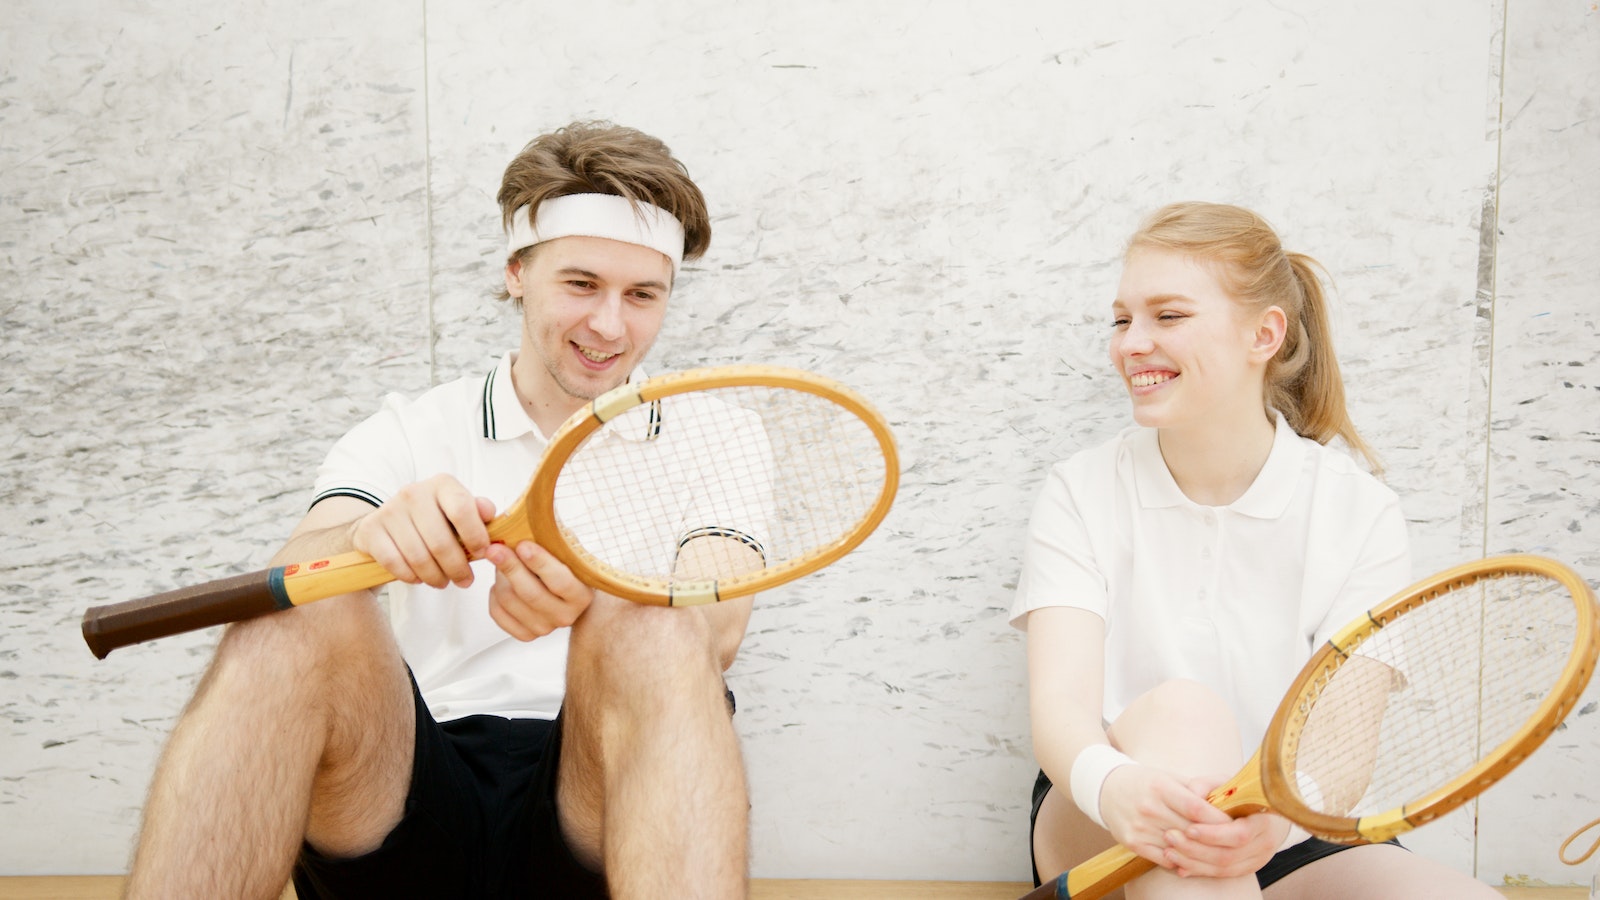 Young Squash Players Sitting Together